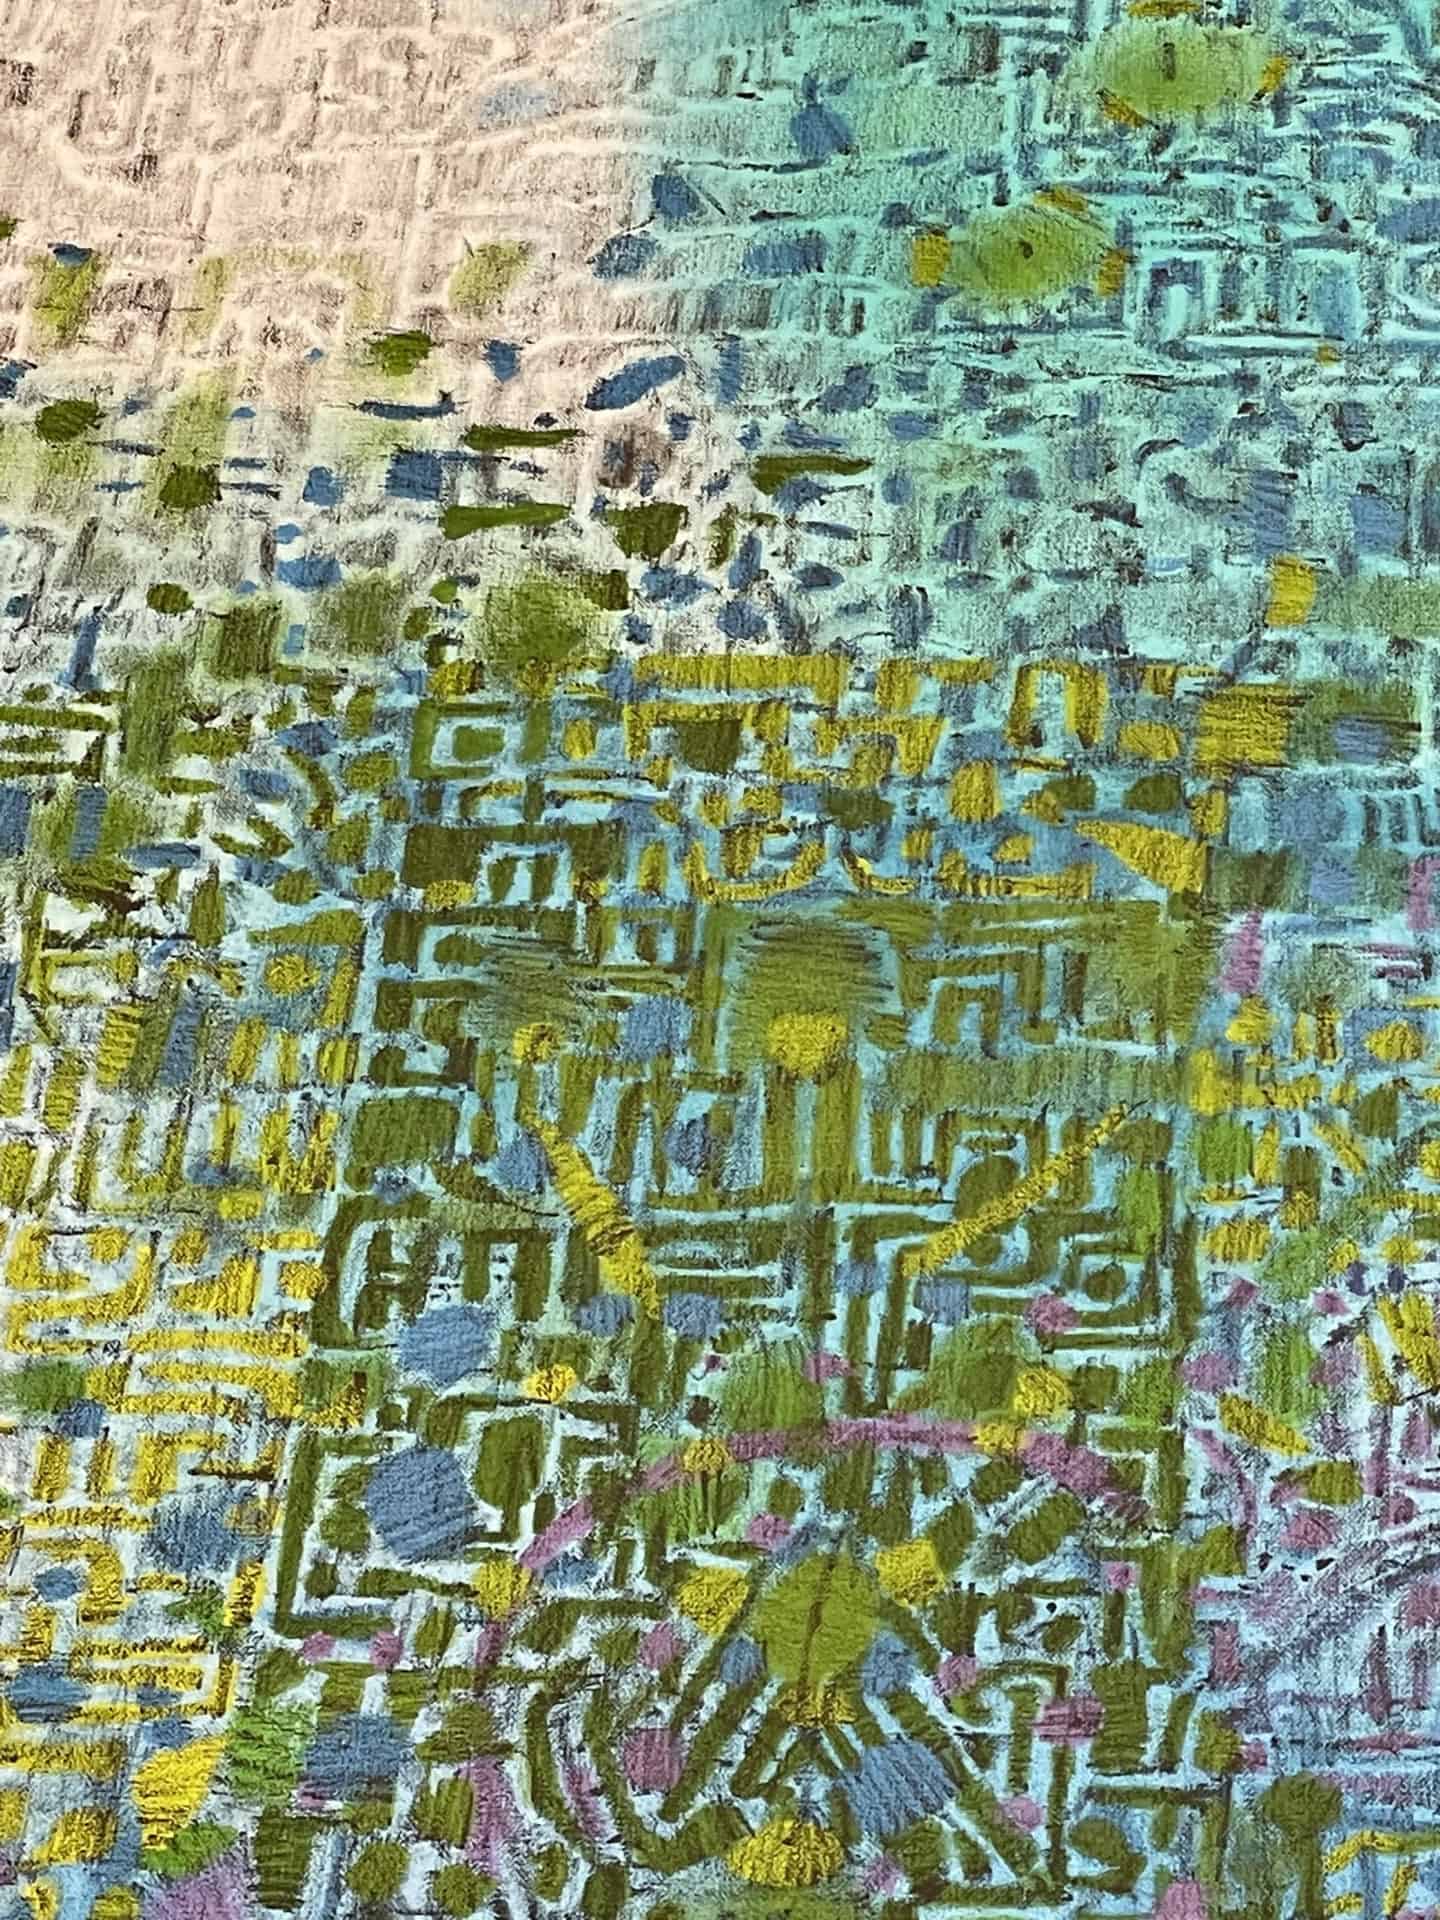 Tomm El-Saieh's painting Canapé Vert gleams in green and turquoise, seen close up in Tomm El-Saieh's 'Imaginary City' at the Clark Art Institute. Press image courtesy of the museum